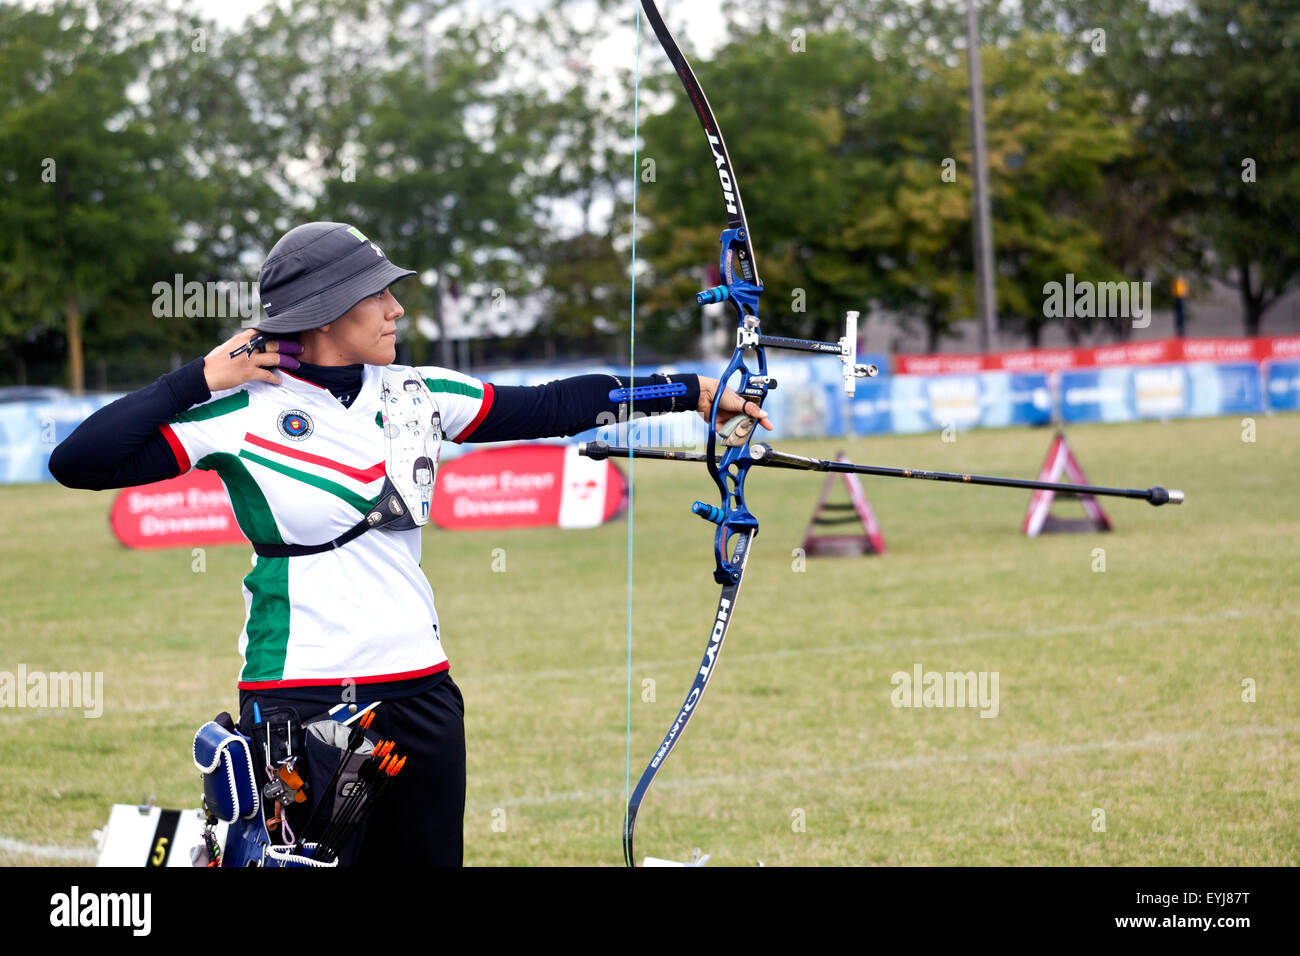 Copenhagen, Denmark, July 30th, 2015: Mexican archer Alecandra Valencia competes in the World Archery Championships in Copenhagen during Thursday's individual matches  in recurve bow. Credit:  OJPHOTOS/Alamy Live News Stock Photo